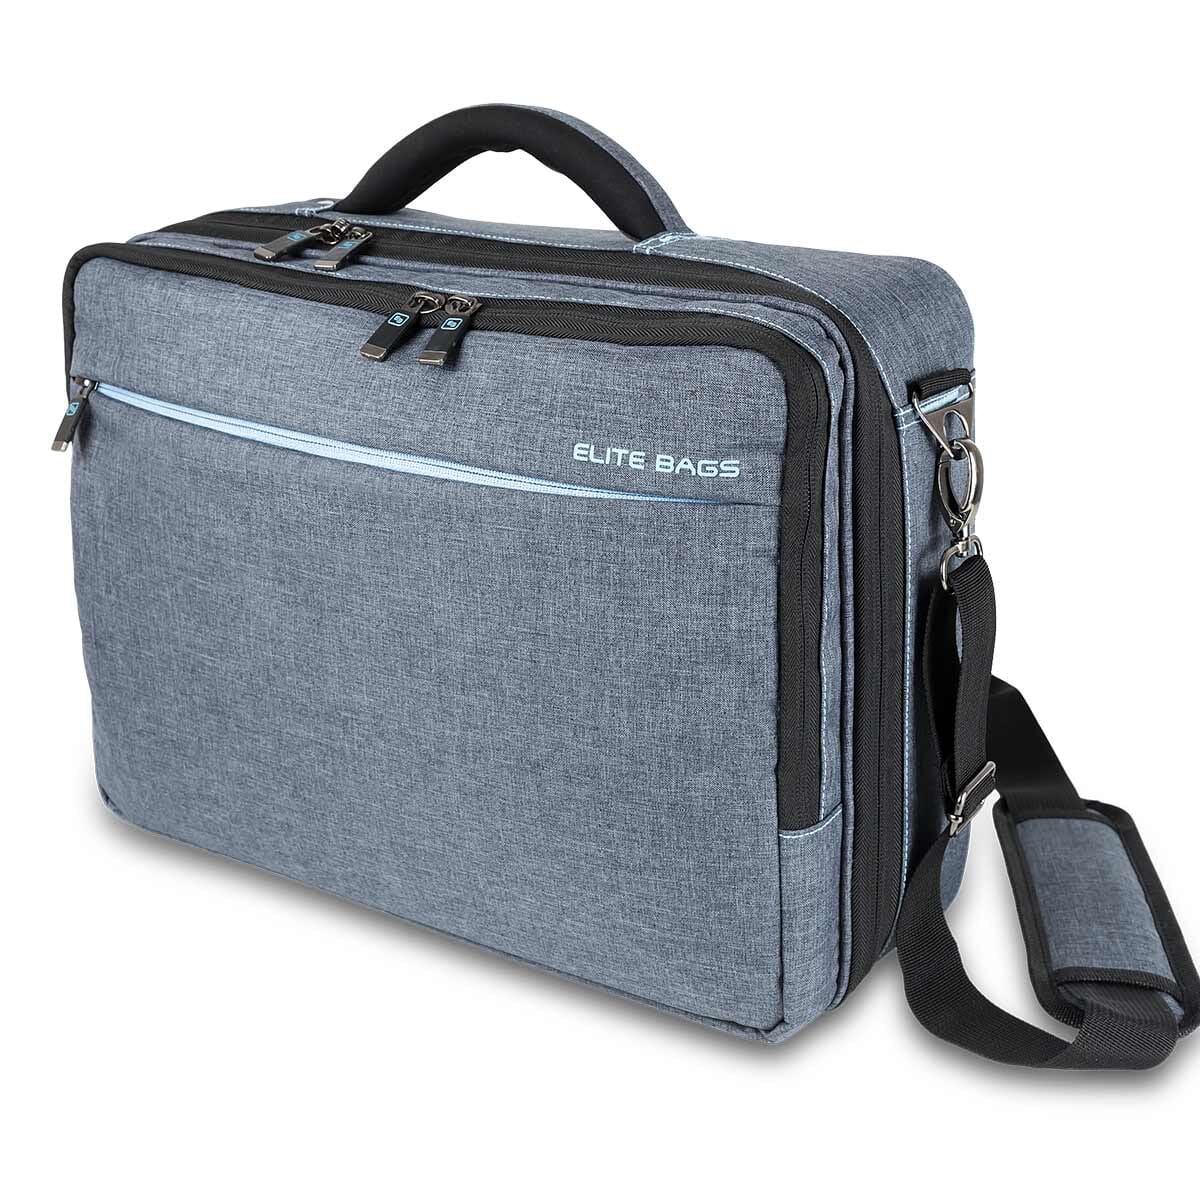 Home - Medical Assistance Bags and Accessories - Elite Bags